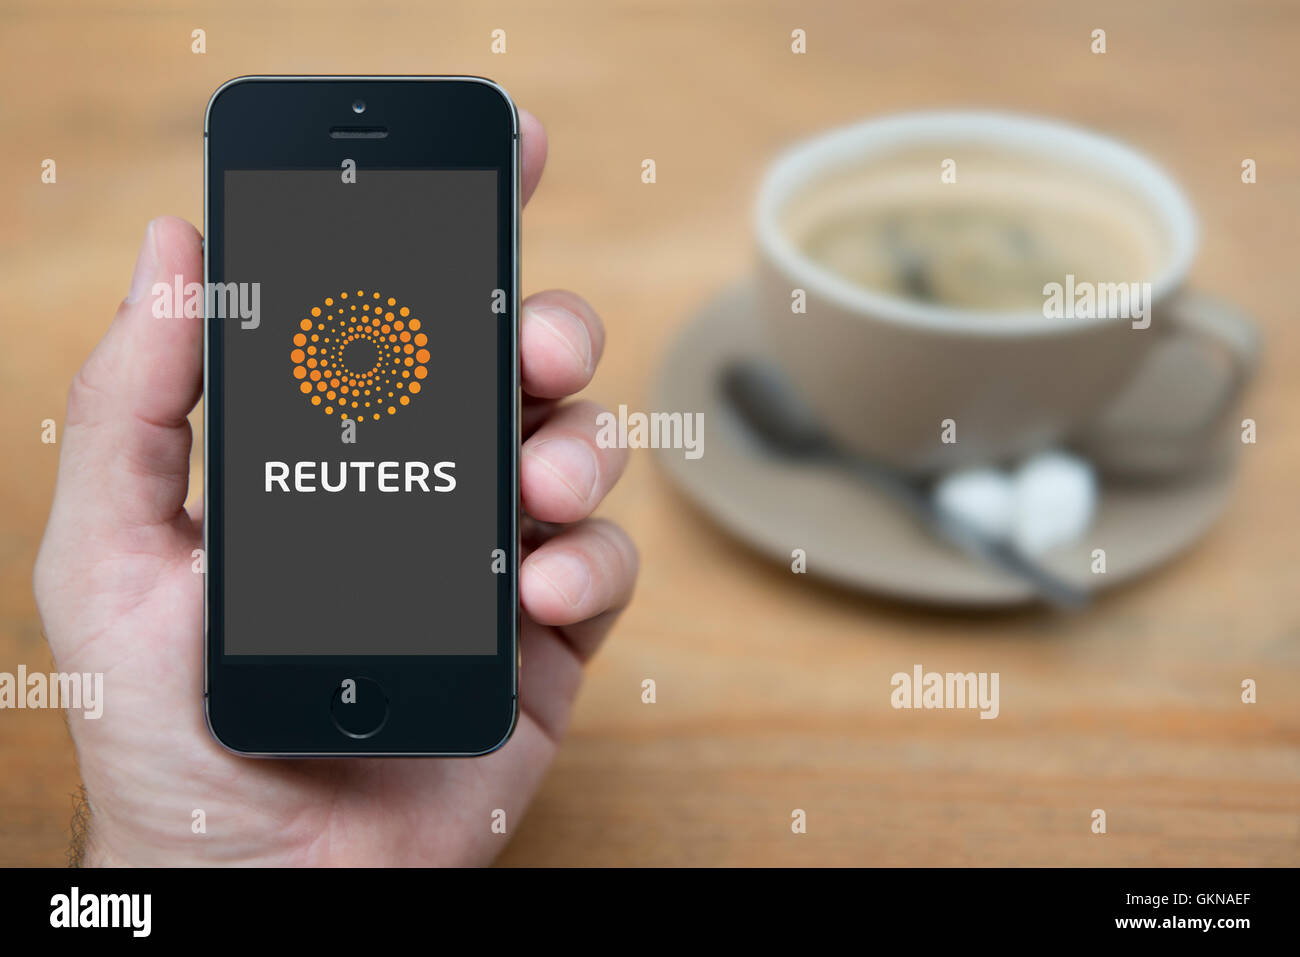 A man looks at his iPhone which displays the Reuters logo, while sat with a cup of coffee (Editorial use only). Stock Photo